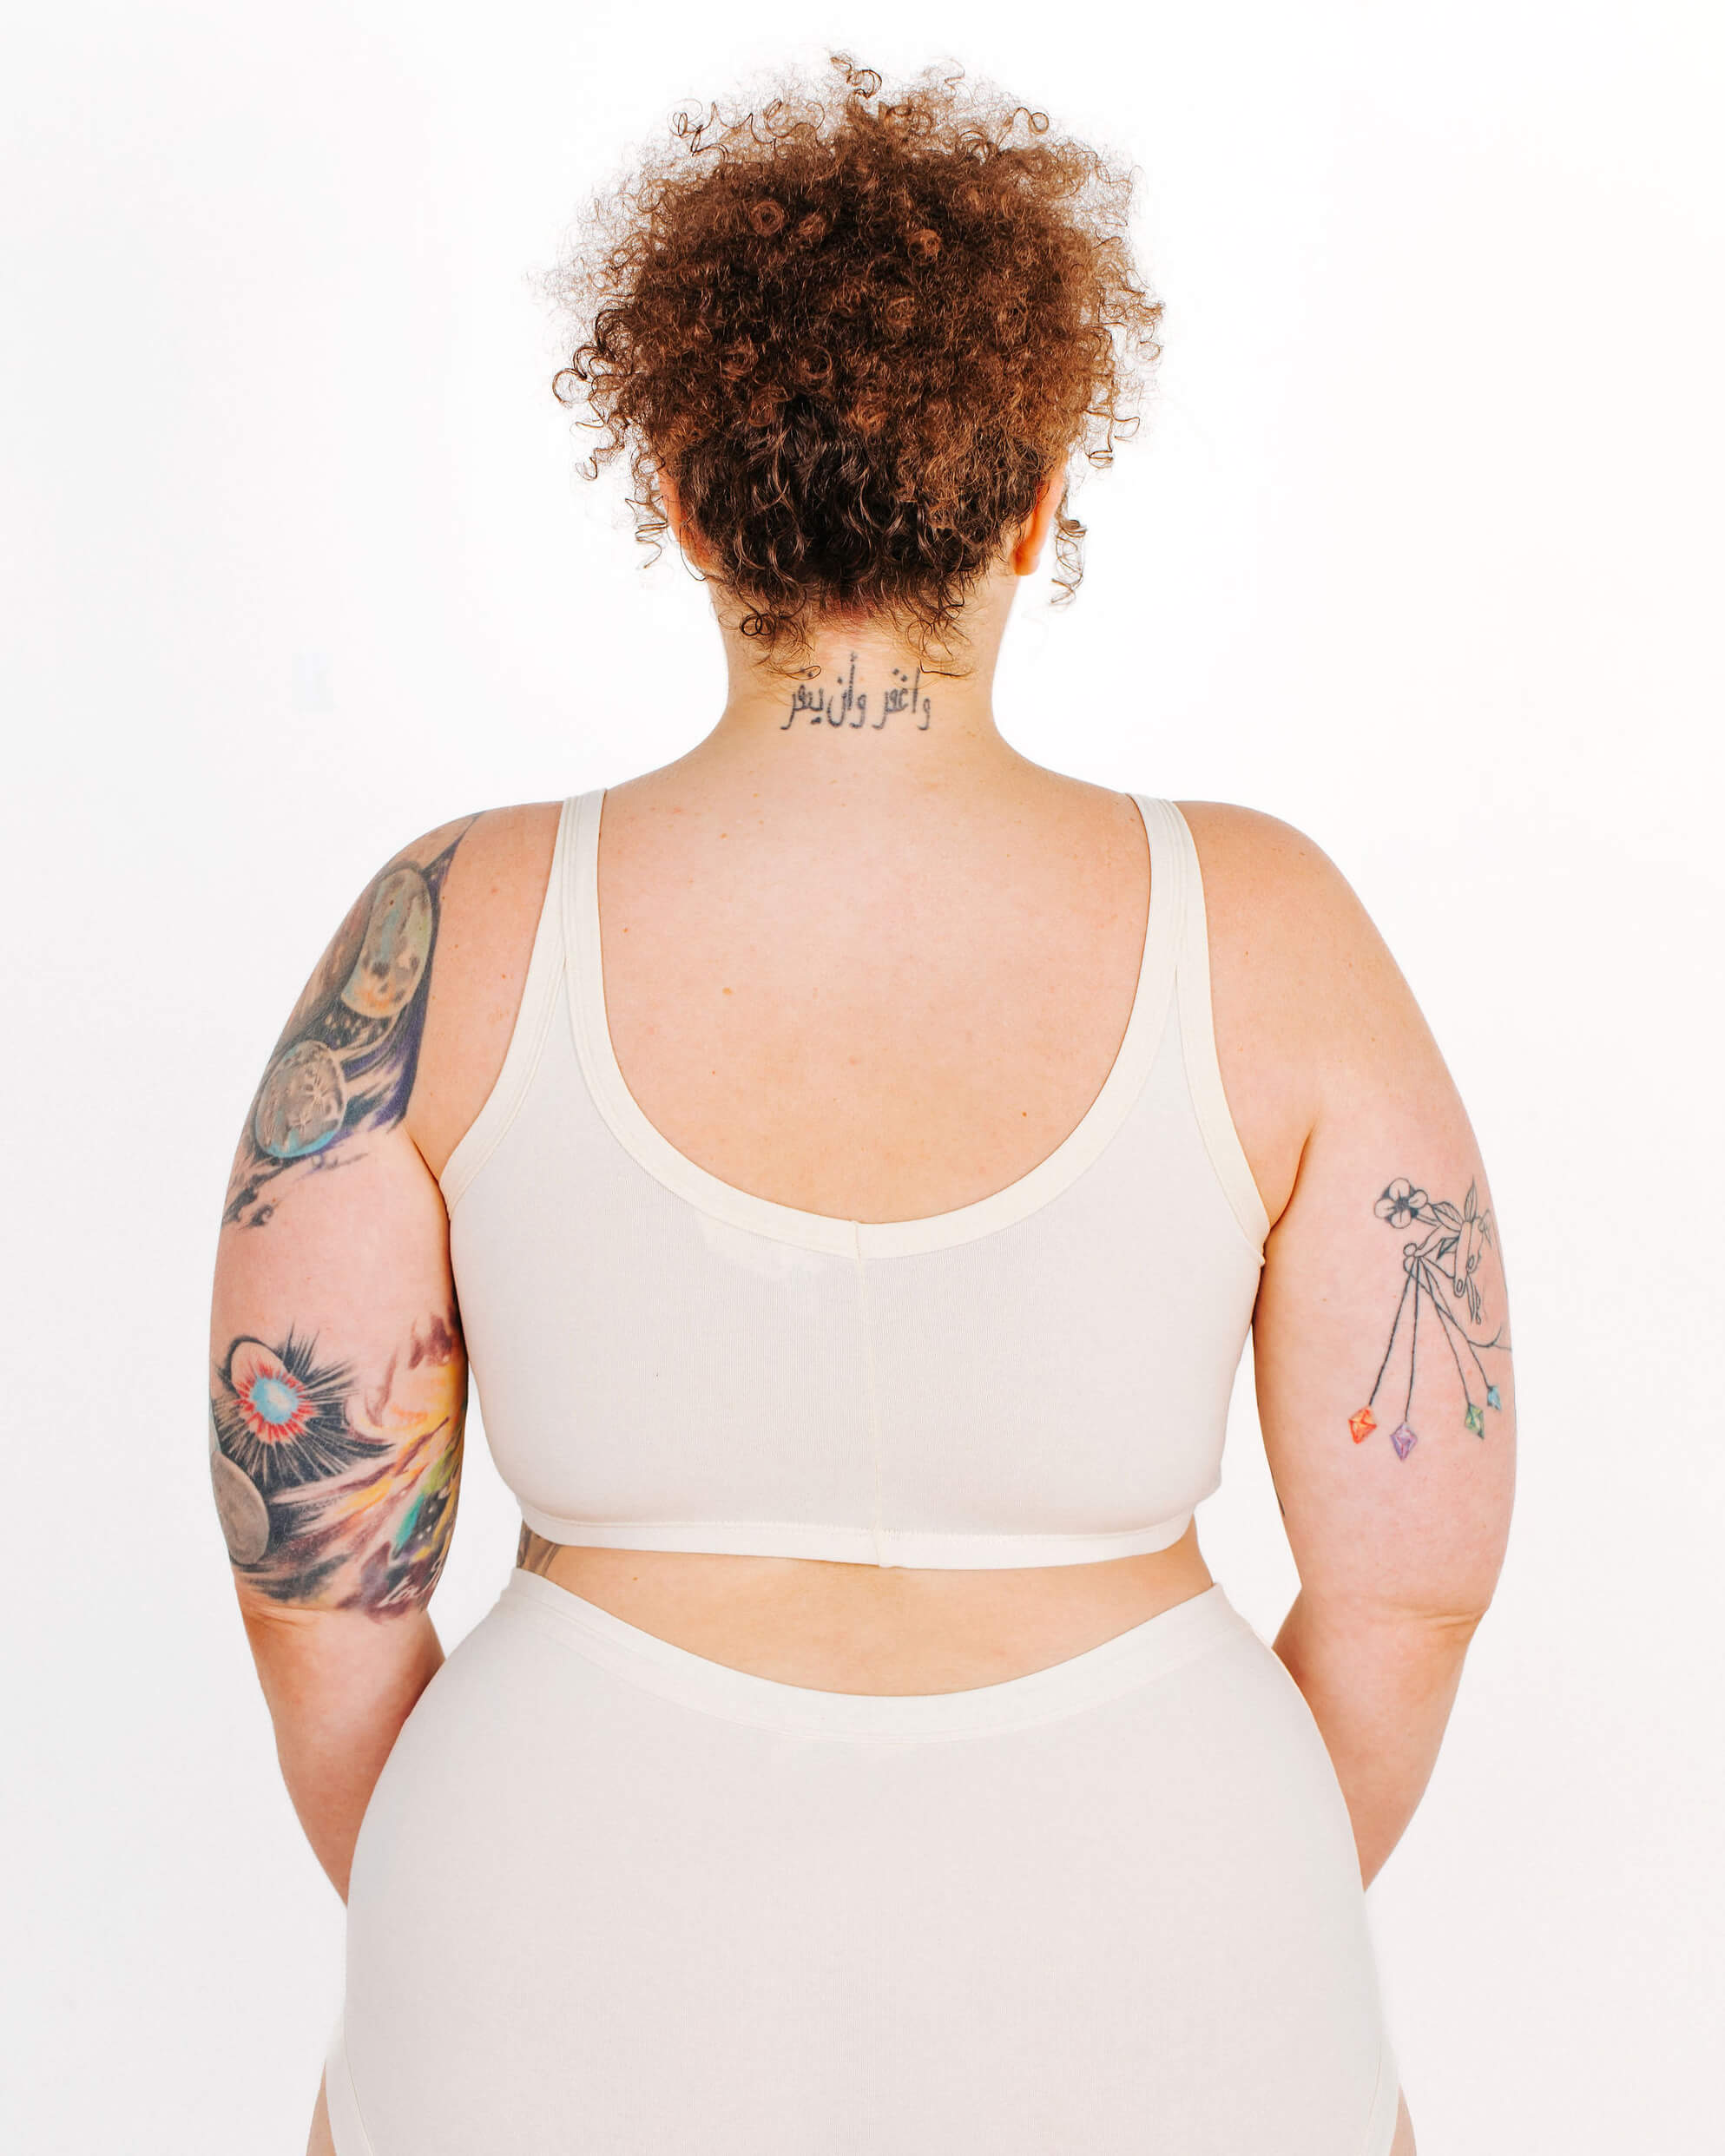 Fit photo from the back of Thunderpants organic cotton Longline Bra in off-white on a model.